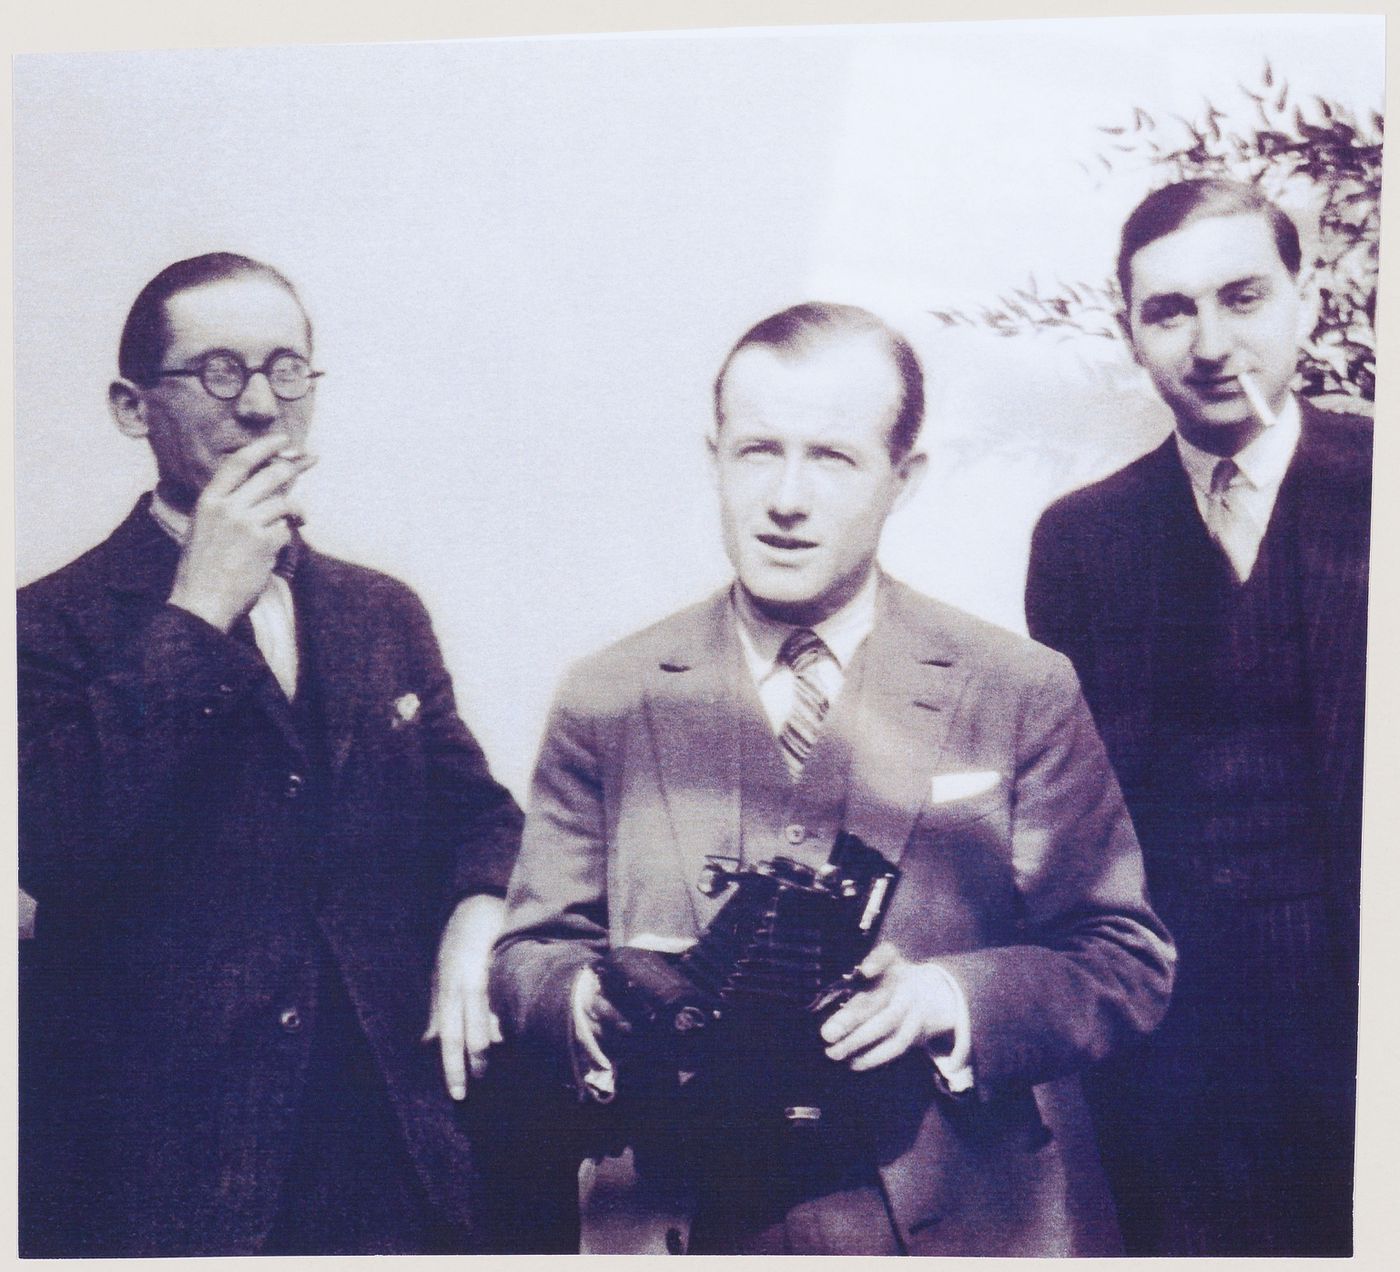 Le Corbusier, Pierre Jeanneret and Jean Fouquet at a party in Charlotte Perriand's apartment in Place Saint-Sulpice, Paris